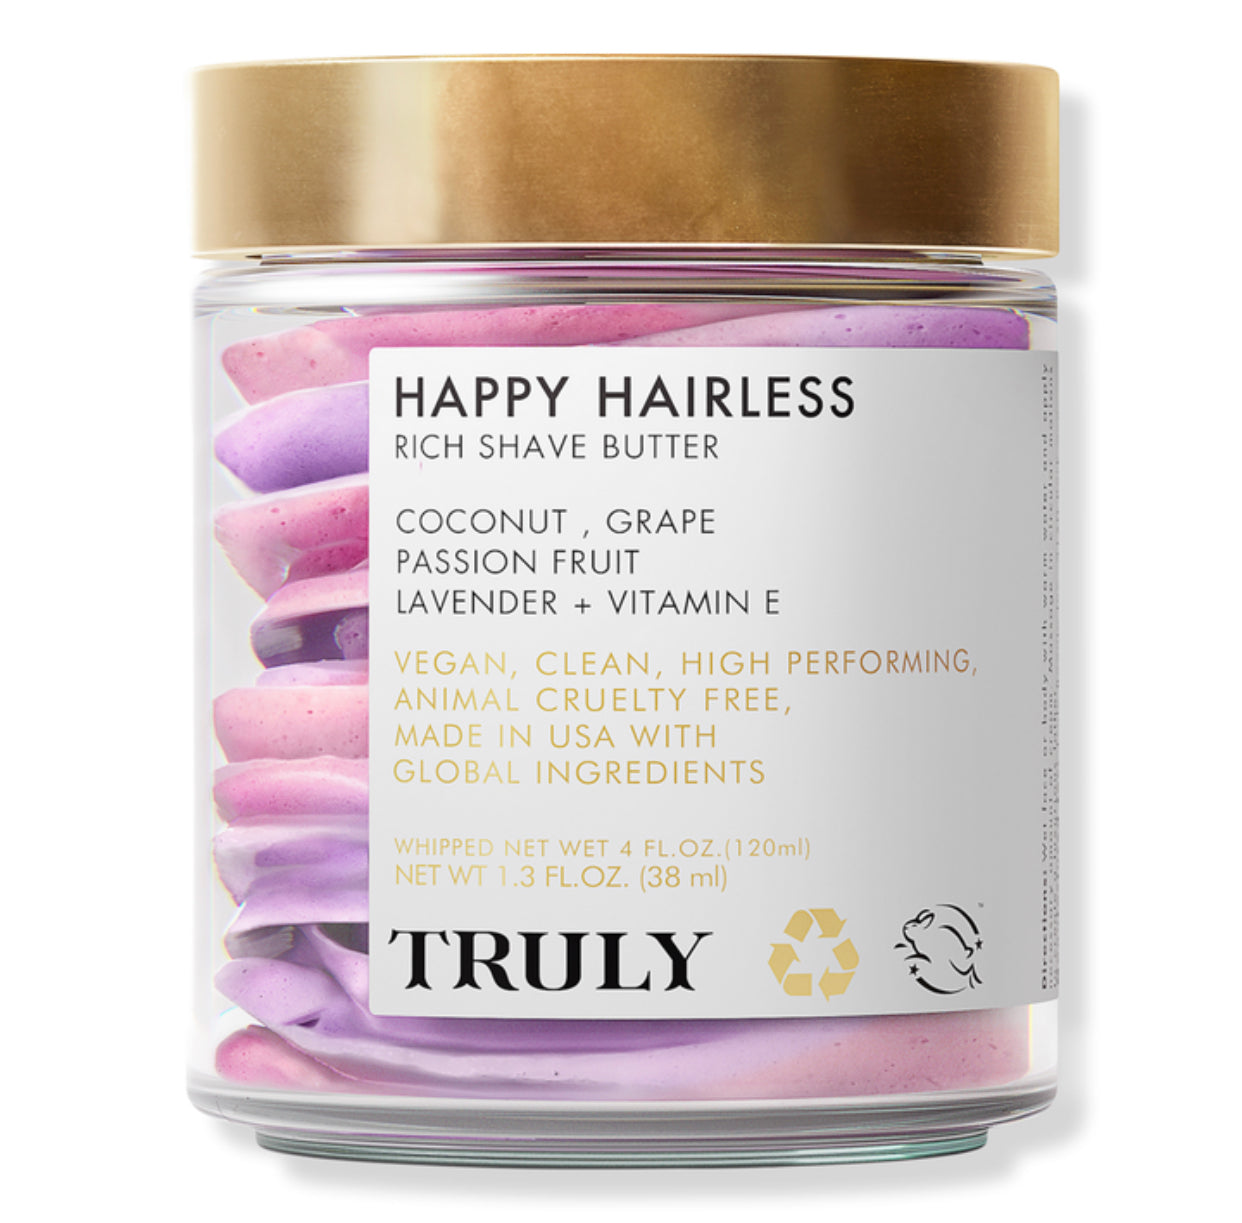 TRULY - Happy Hairless Shave Butter | 38 mL